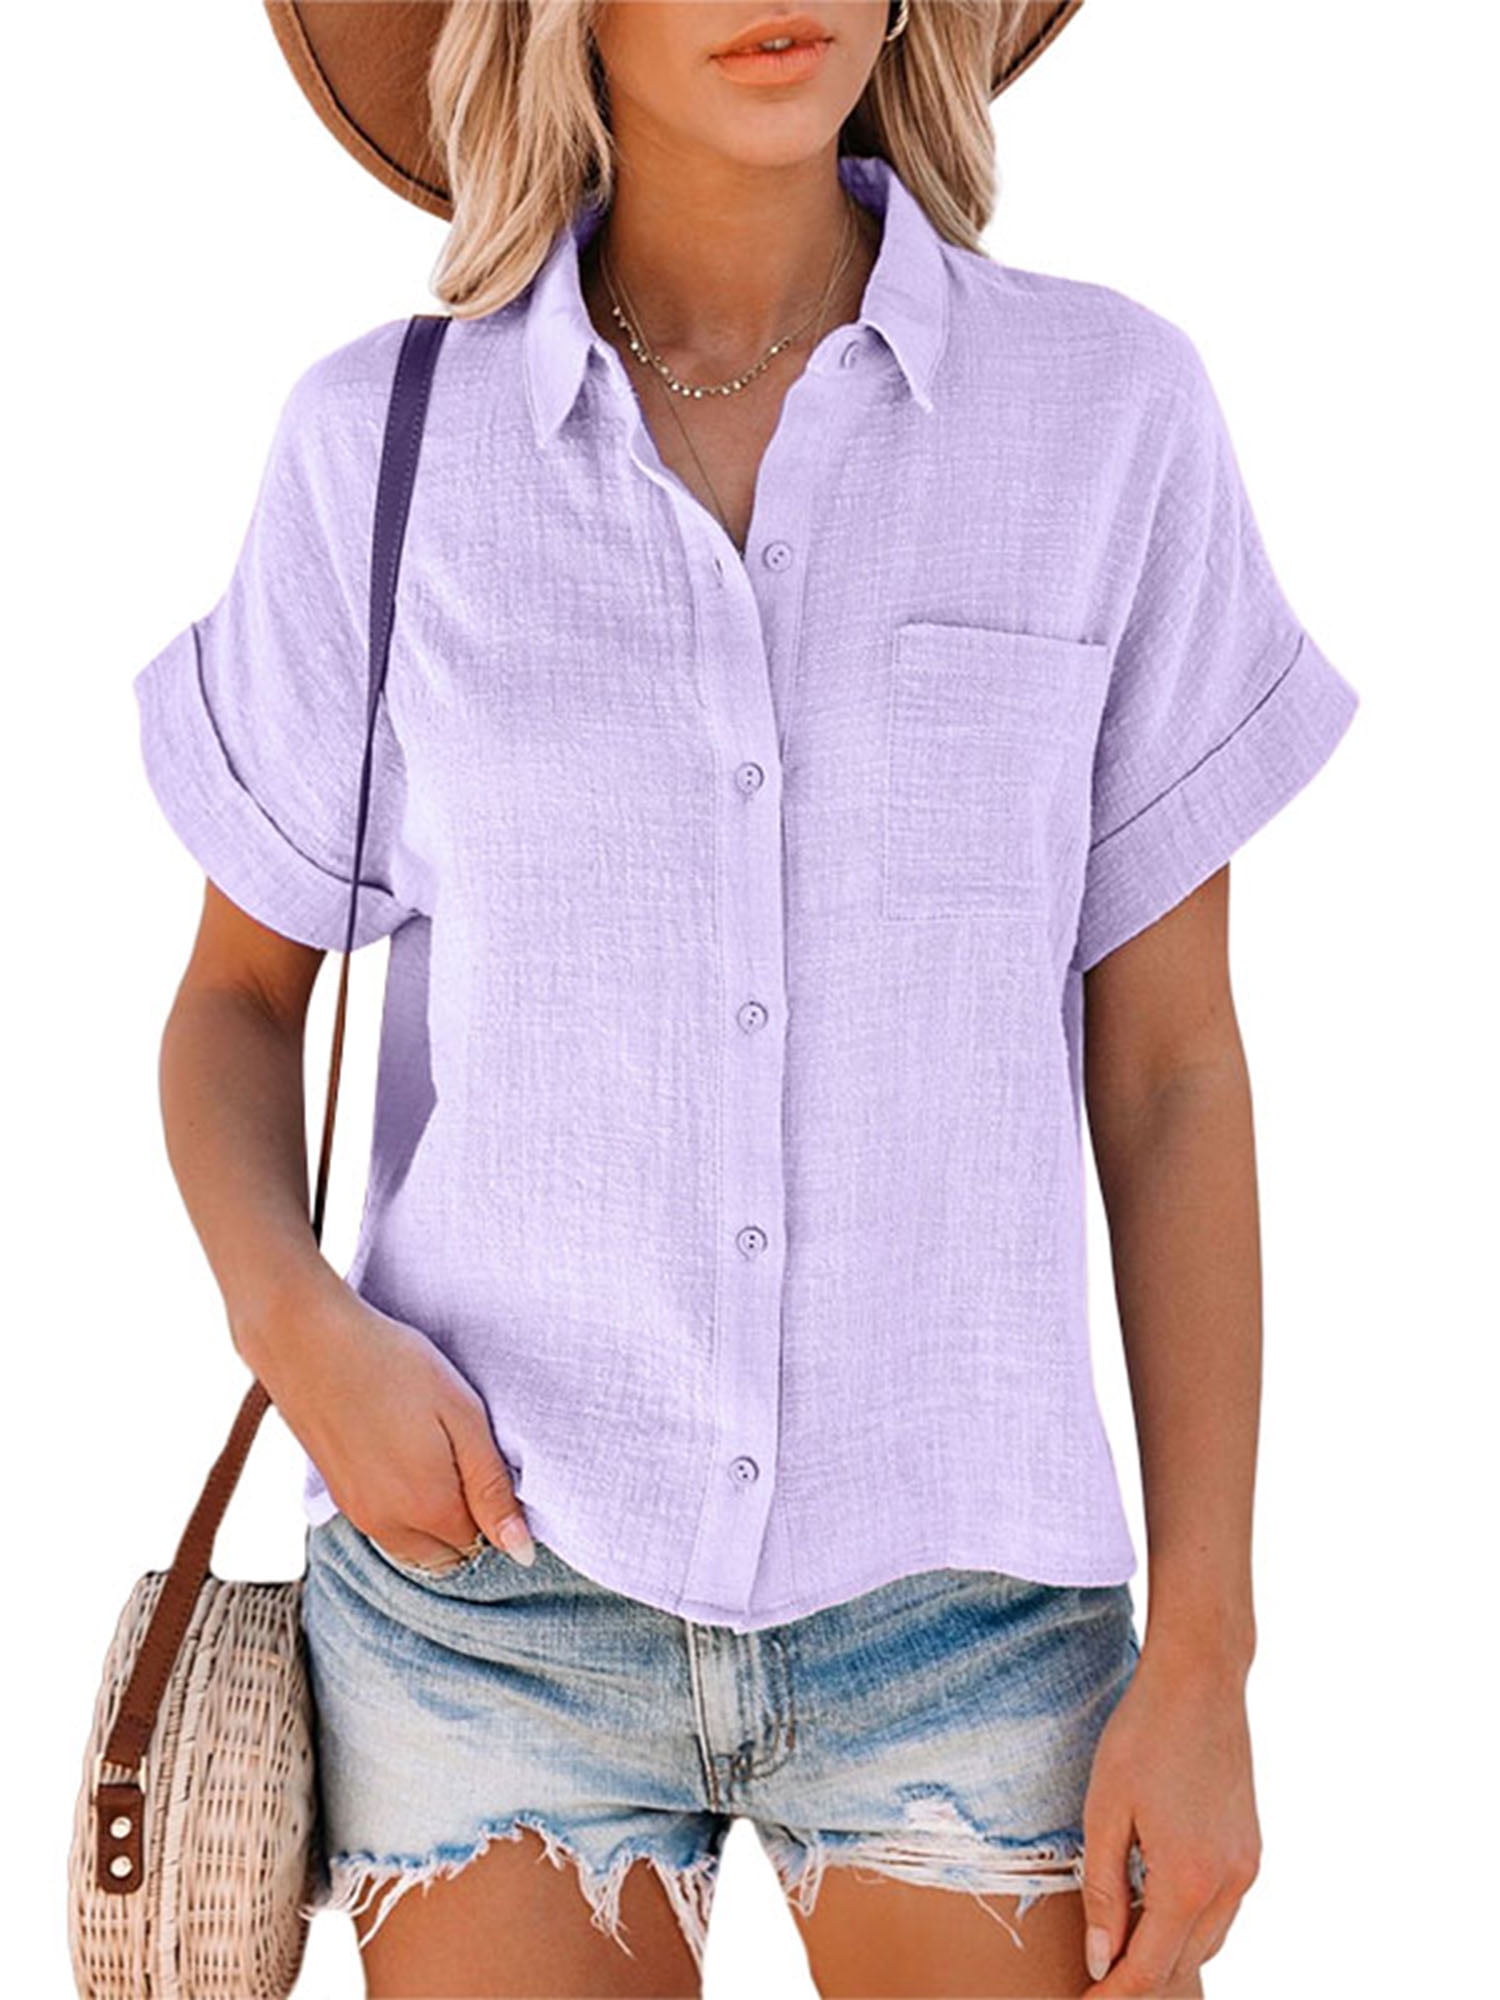 Women Casual Short Sleeves Button Down Lapel Top Ladies Office Work Shirt Blouse 